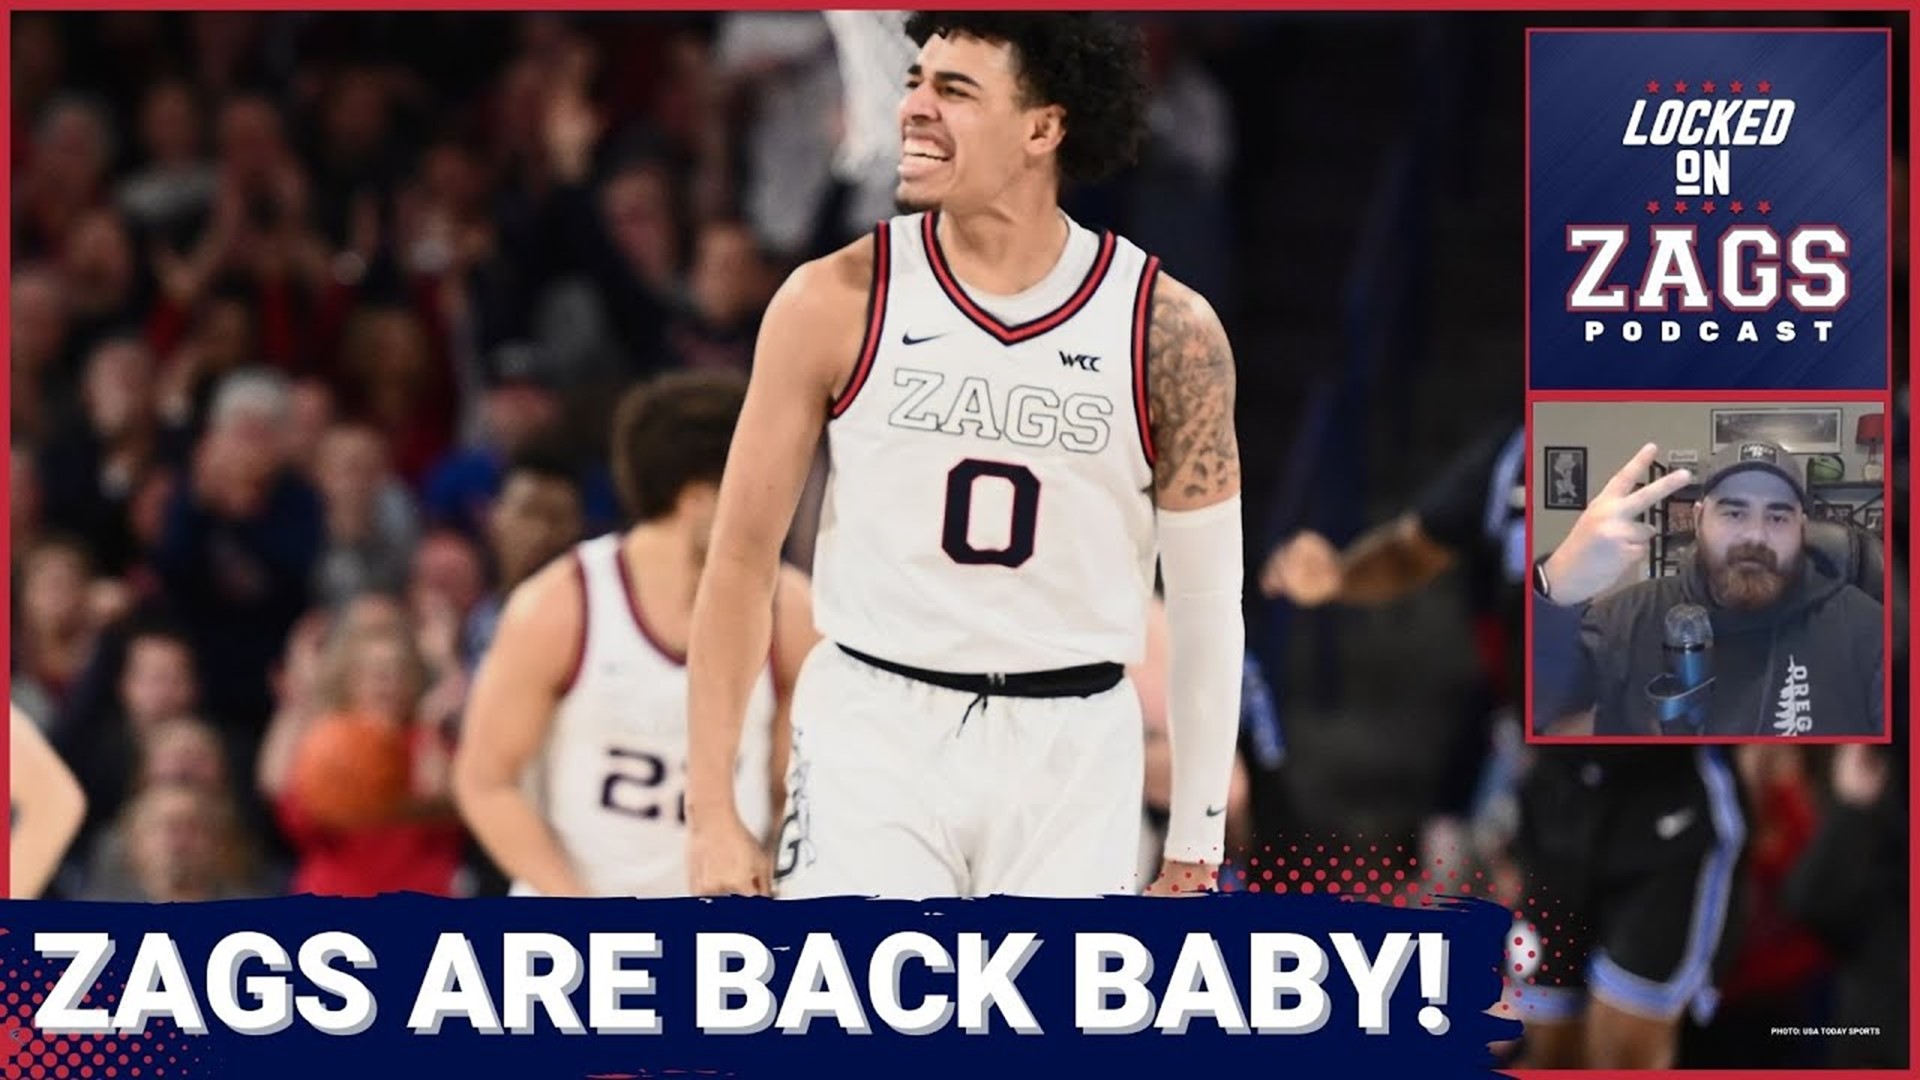 The Zags had an outstanding gameplan, sending a statement to all of college basketball: this team is back and they can beat anyone in the country.